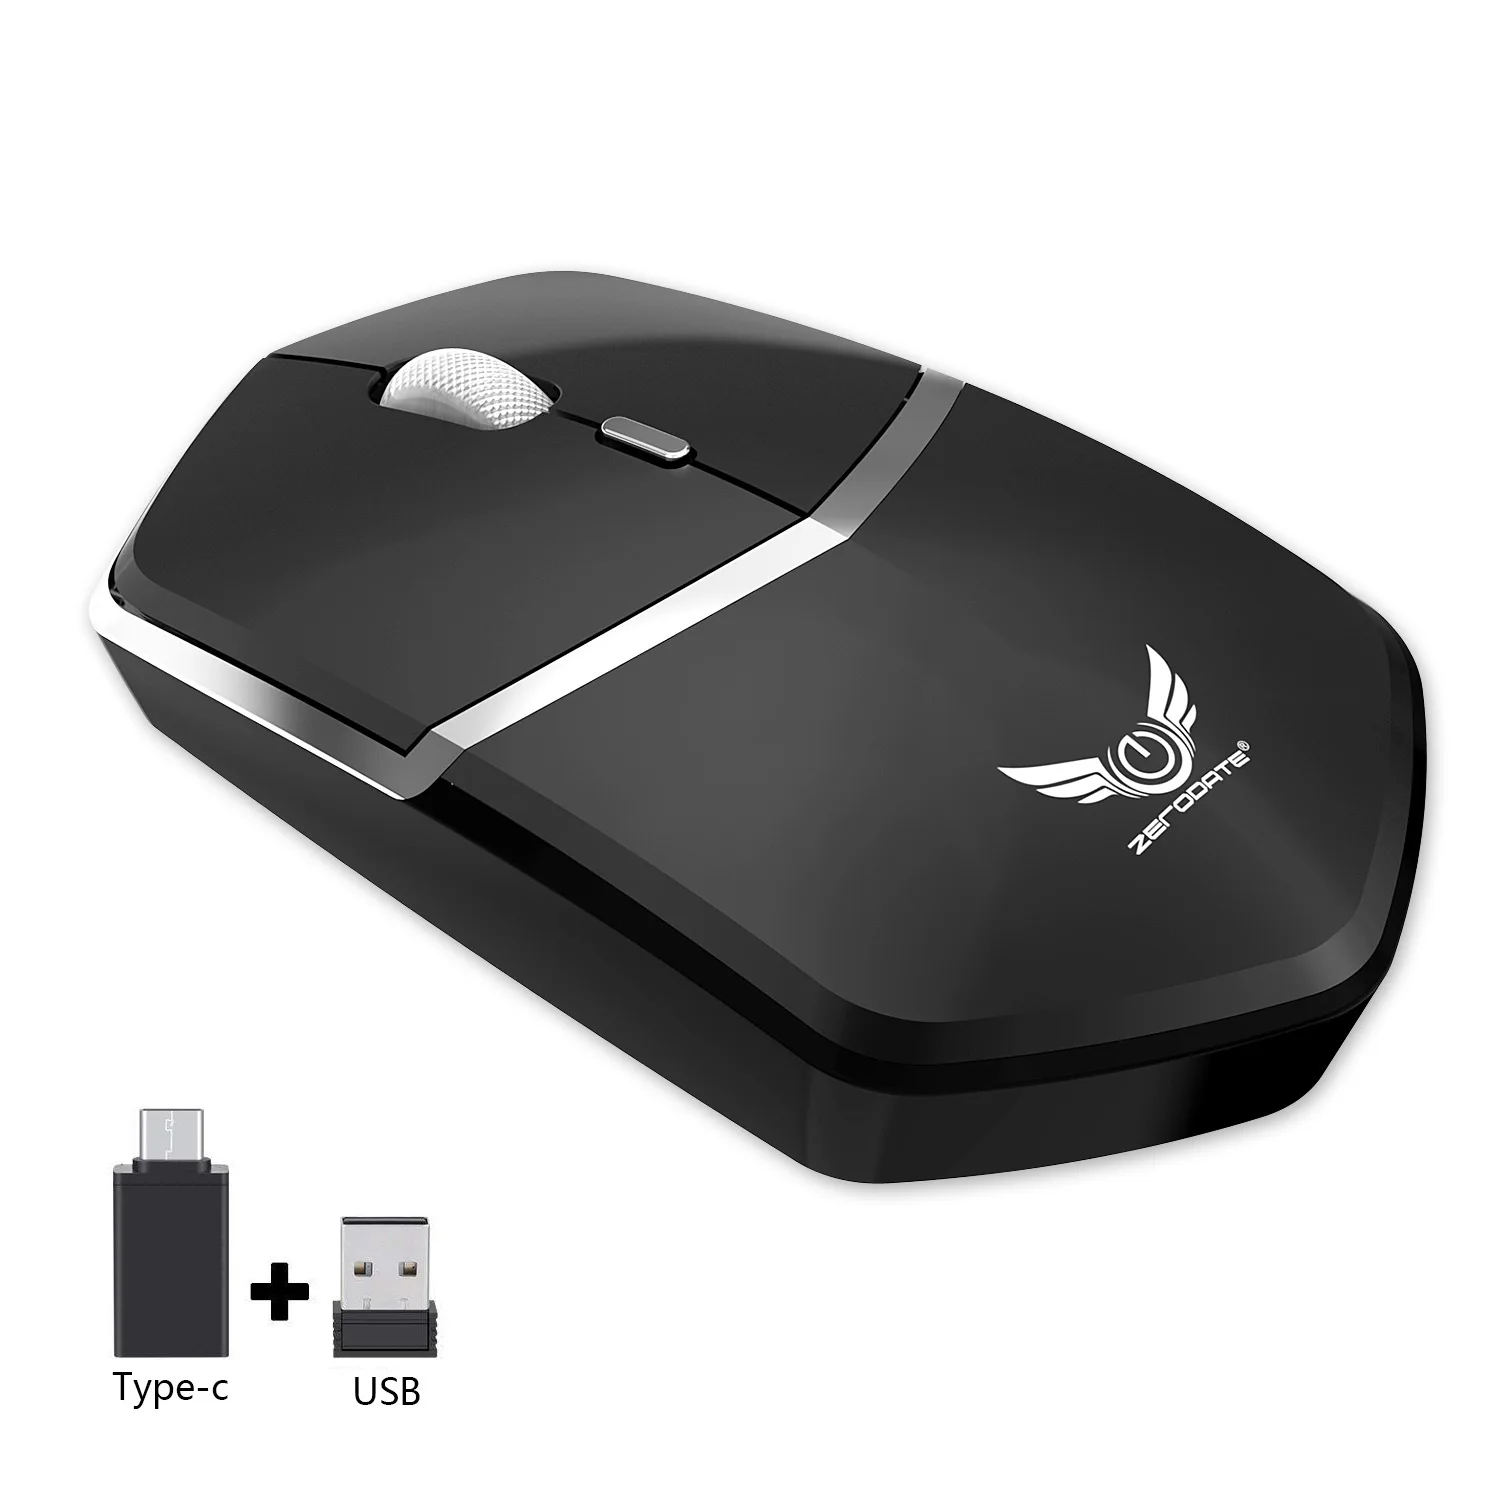 

2.4GHz Wireless Gaming mouse Mice With USB Receiver Gamer 1600DPI Mouse For Computer PC Laptop Gamer Gaming